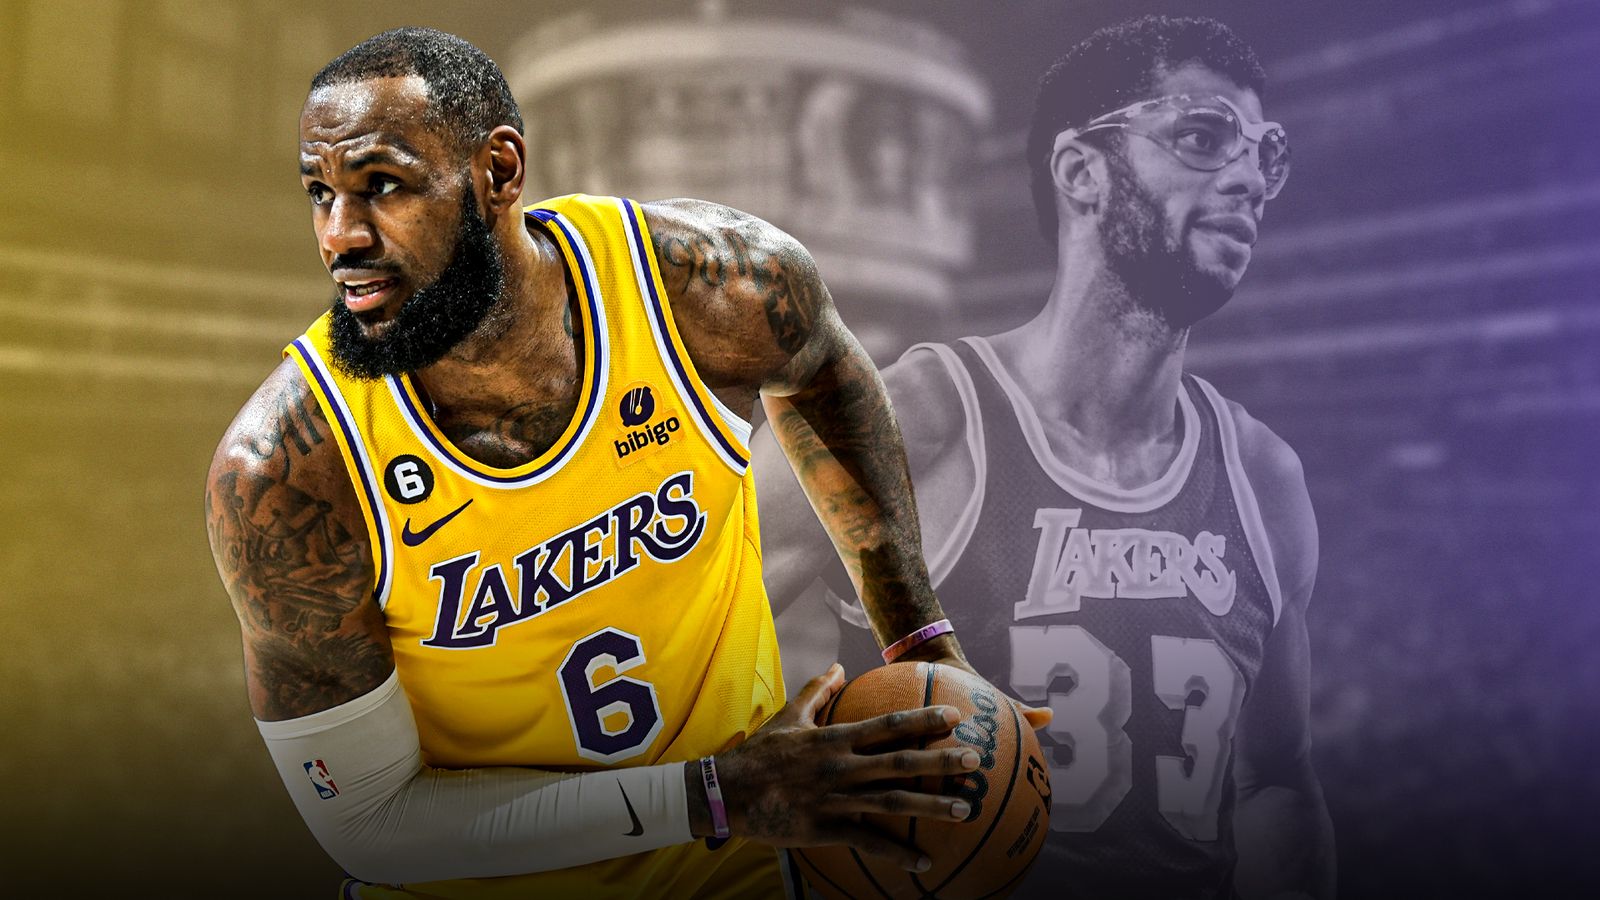 LeBron truly worthy successor to Kareem's all-time scoring crown